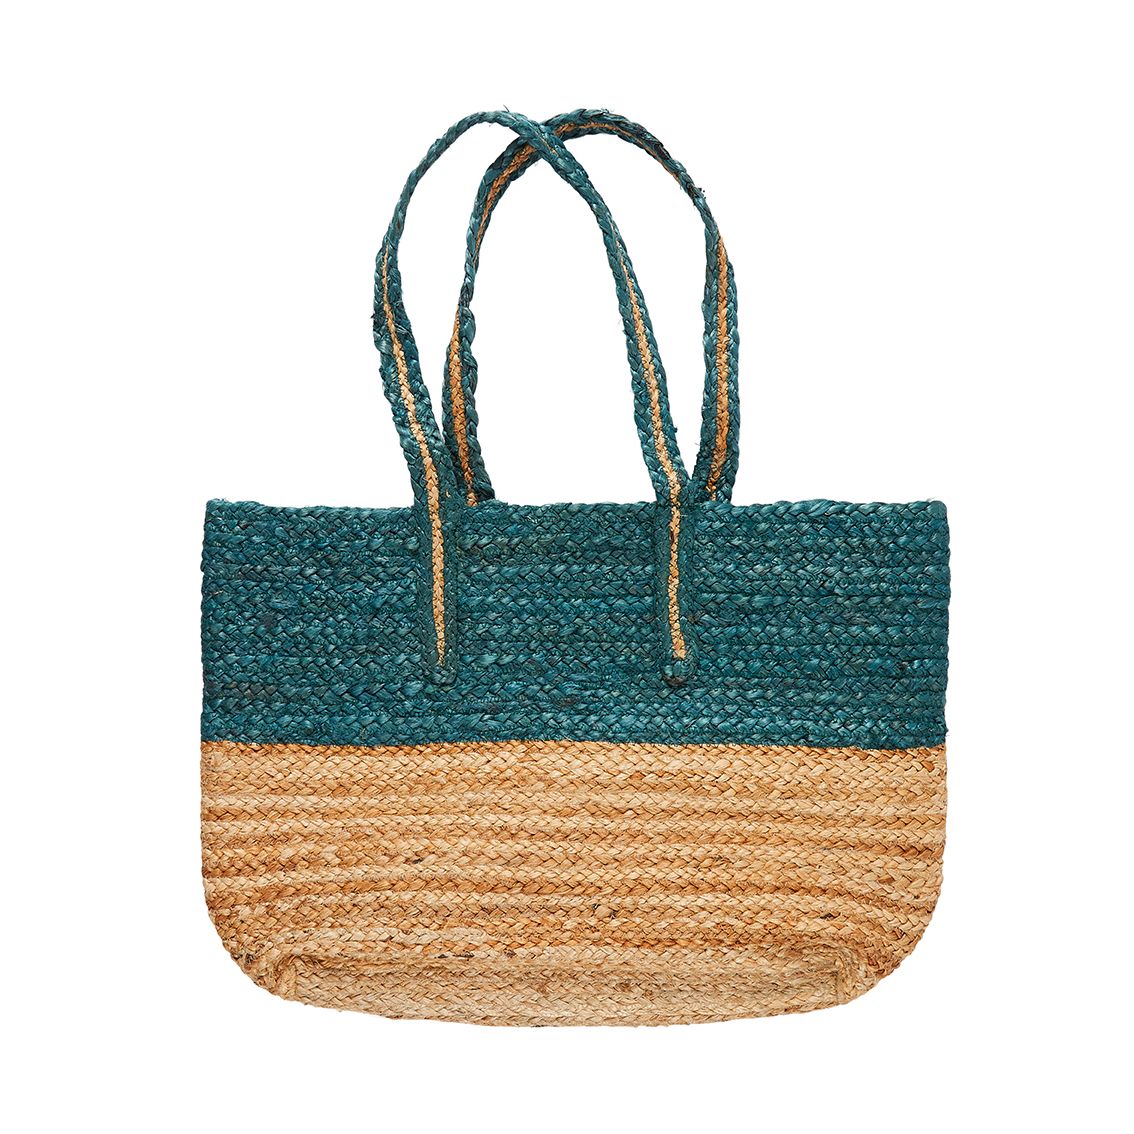 RECYCLED LARGE ORGANIC TEAL JUTE BEACH ECO-TOTE